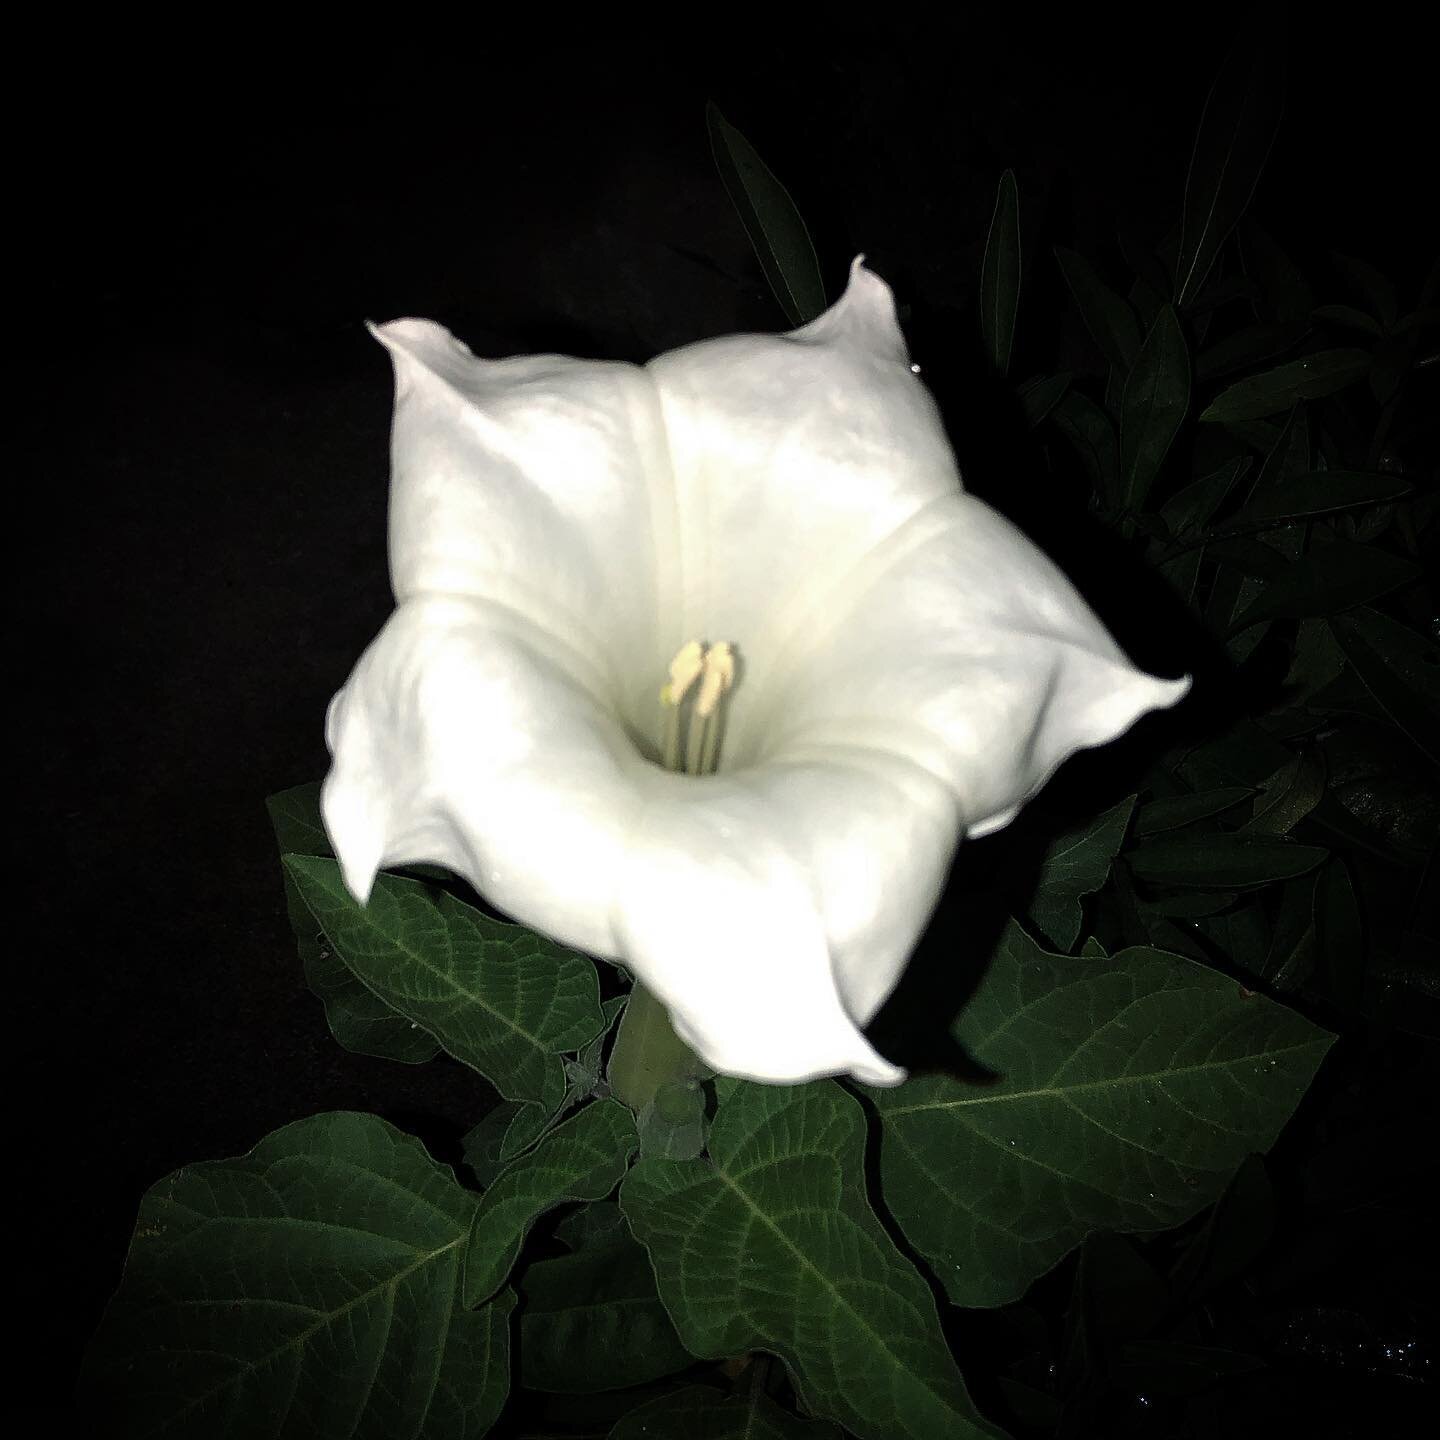 Our Moonflower - Datura metel 'Belle Blanche' - is finally in bloom! This is our FOURTH year trying to grow it and we finally have a bloom! Bought the seeds from John Scheepers Kitchen Garden Seeds and started them in early March. Totally worth the t